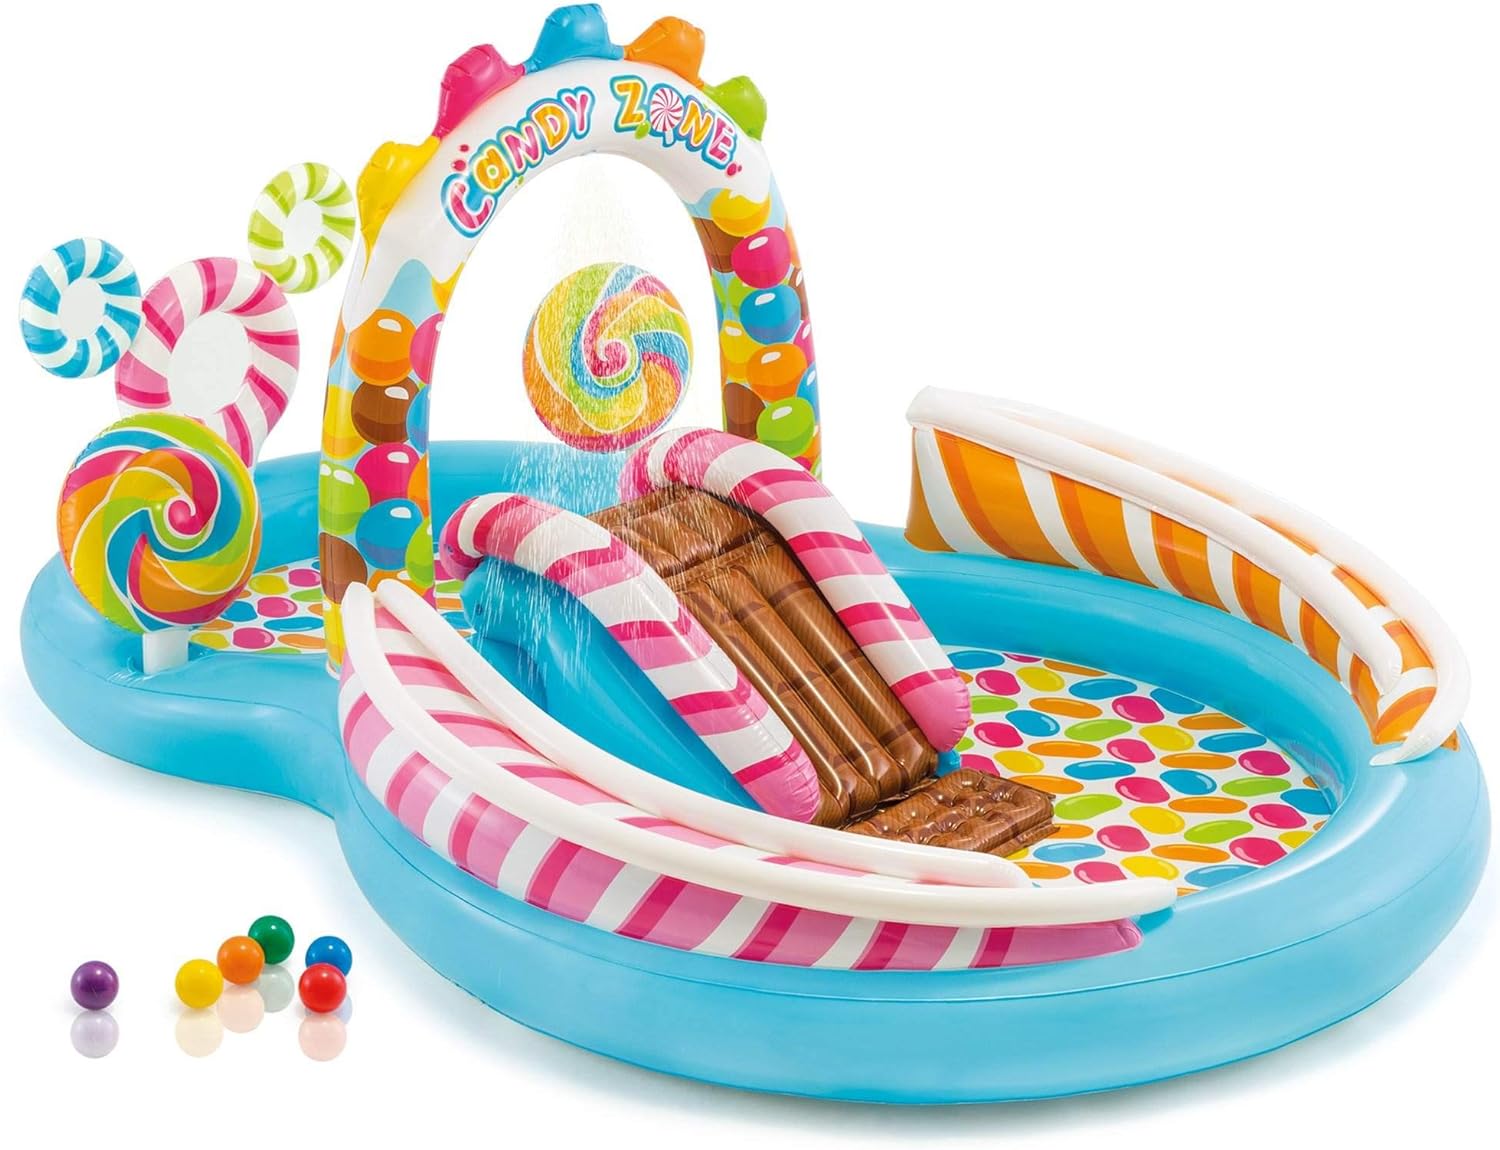 Intex Kids Inflatable Play Center Pool with Waterslide